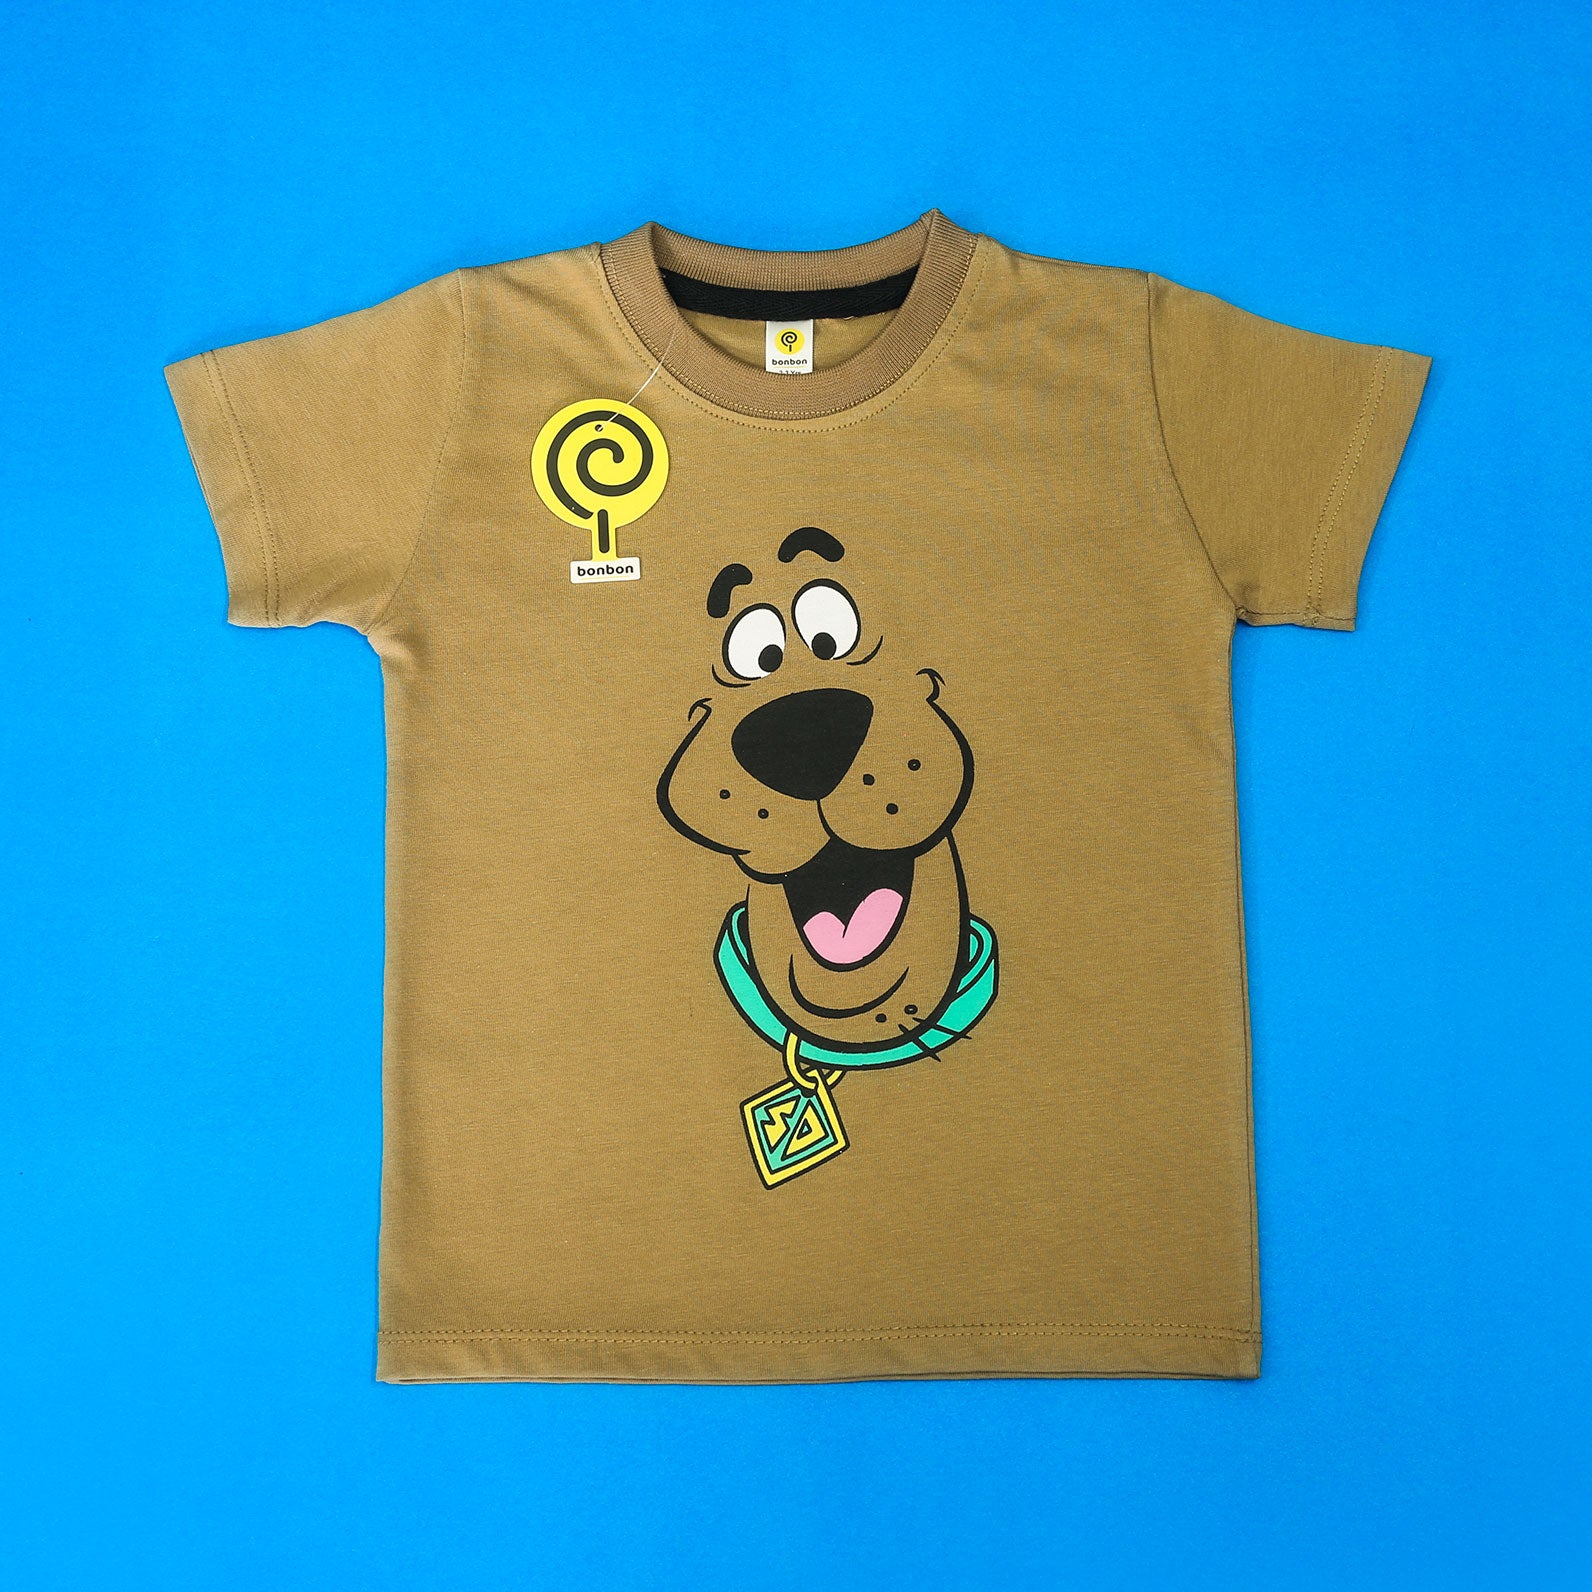 Scooby Brown Tee